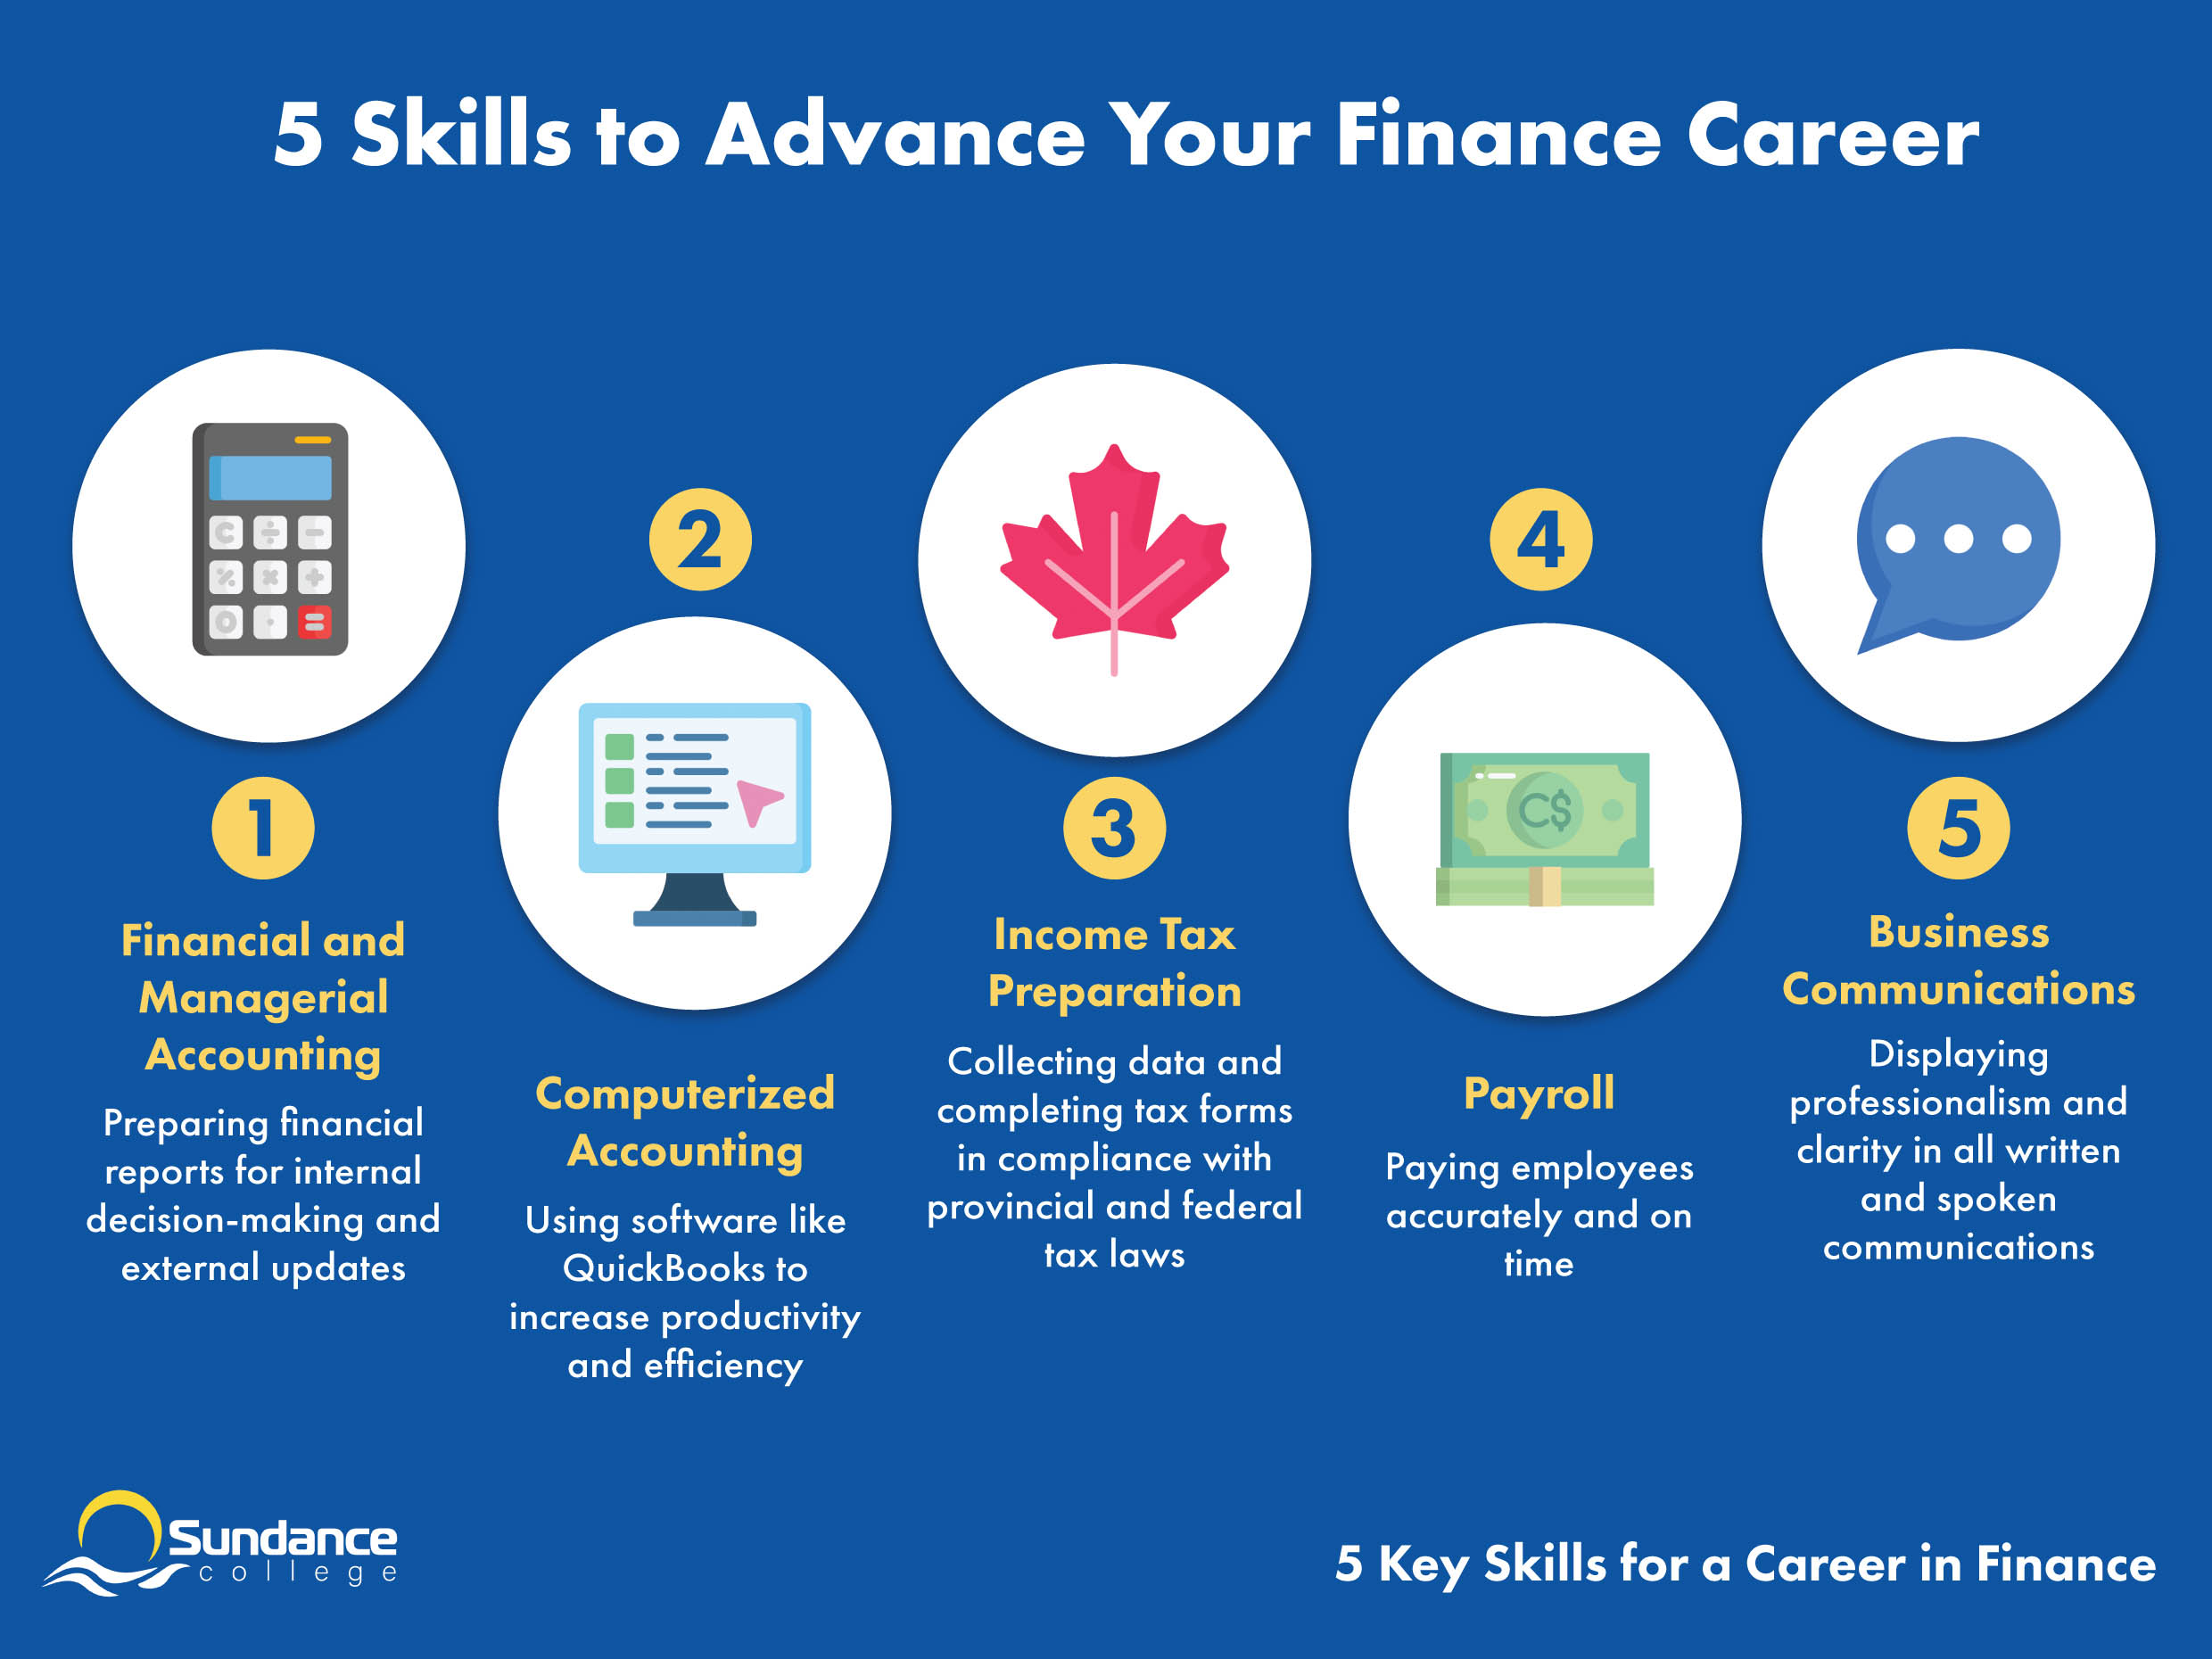 Infographic listing 5 skills to advance your finance career: financial and managerial accounting, computerized accounting, income tax preparation, payroll and business communications.